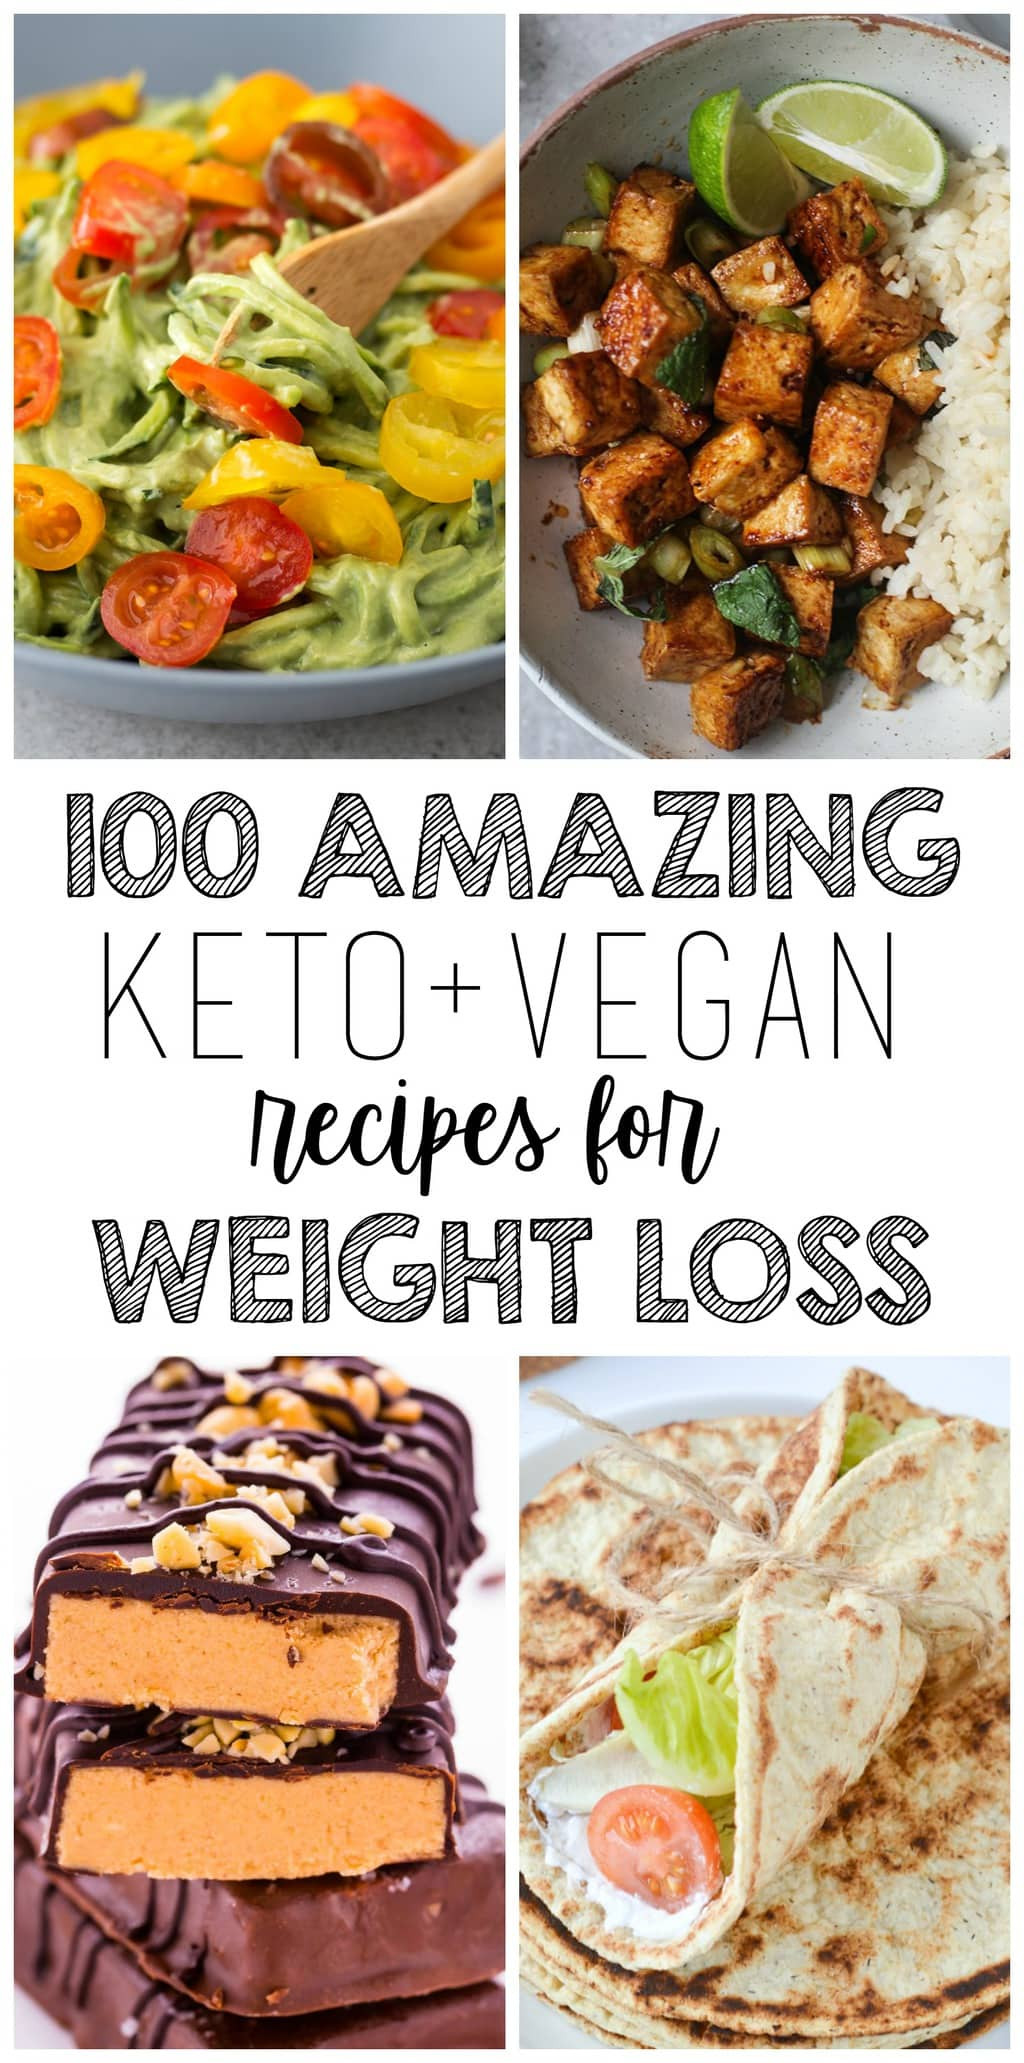 Vegan Keto Protein Sources
 100 AMAZING Keto Vegan Recipes For Weight Loss